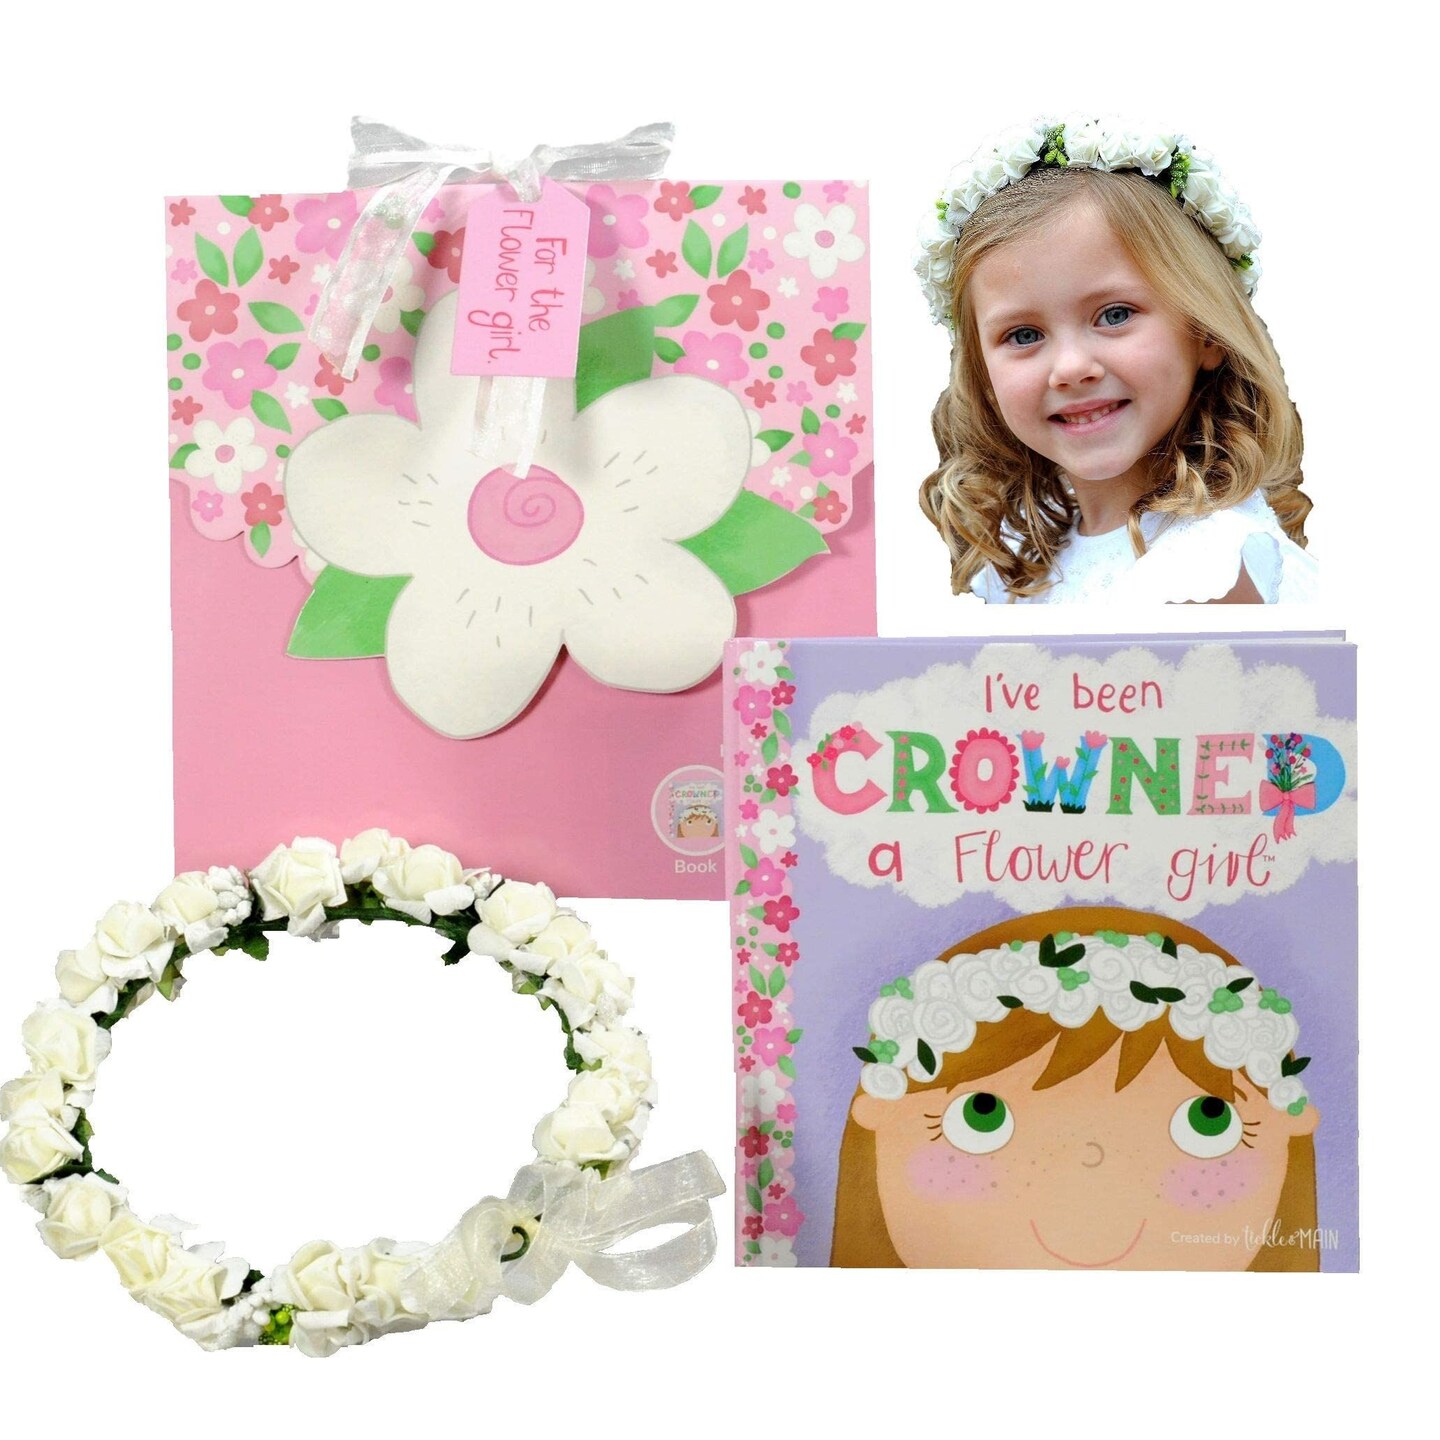 Tickle &#x26; Main Flower Girl Gift Set, Flower Girl Proposal, Book with Floral Crown Headband Headpiece in Adorable Gift Box